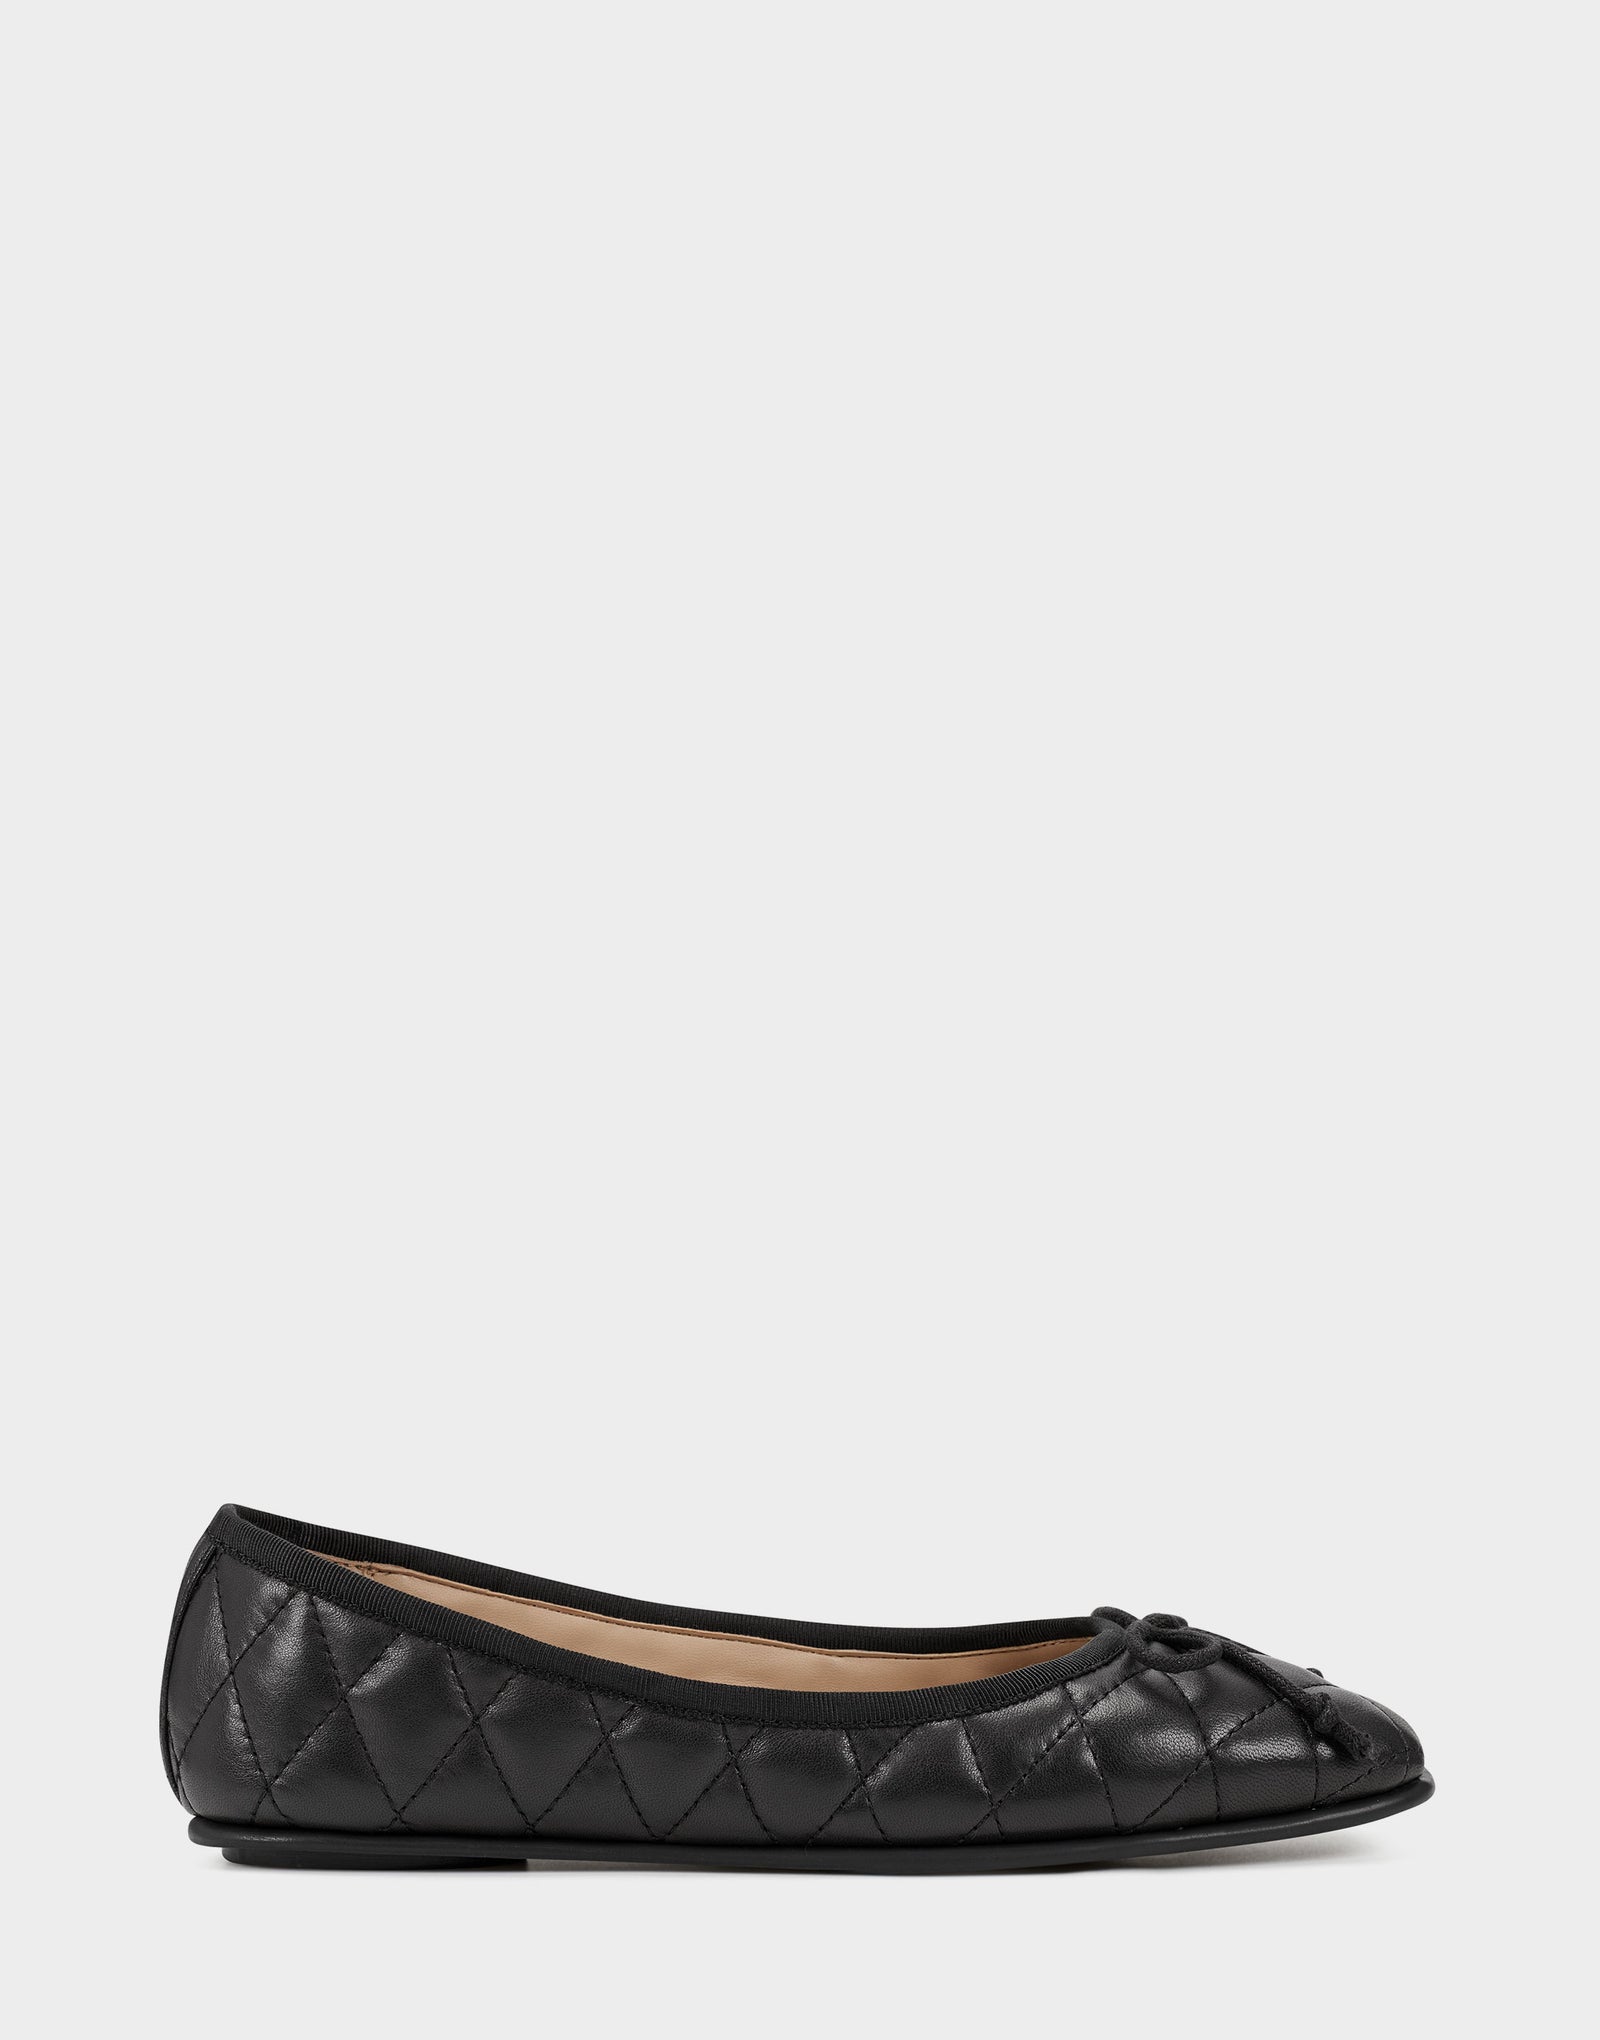 Slingback leather ballet flats Chanel Black size 40 EU in Leather - 34997435